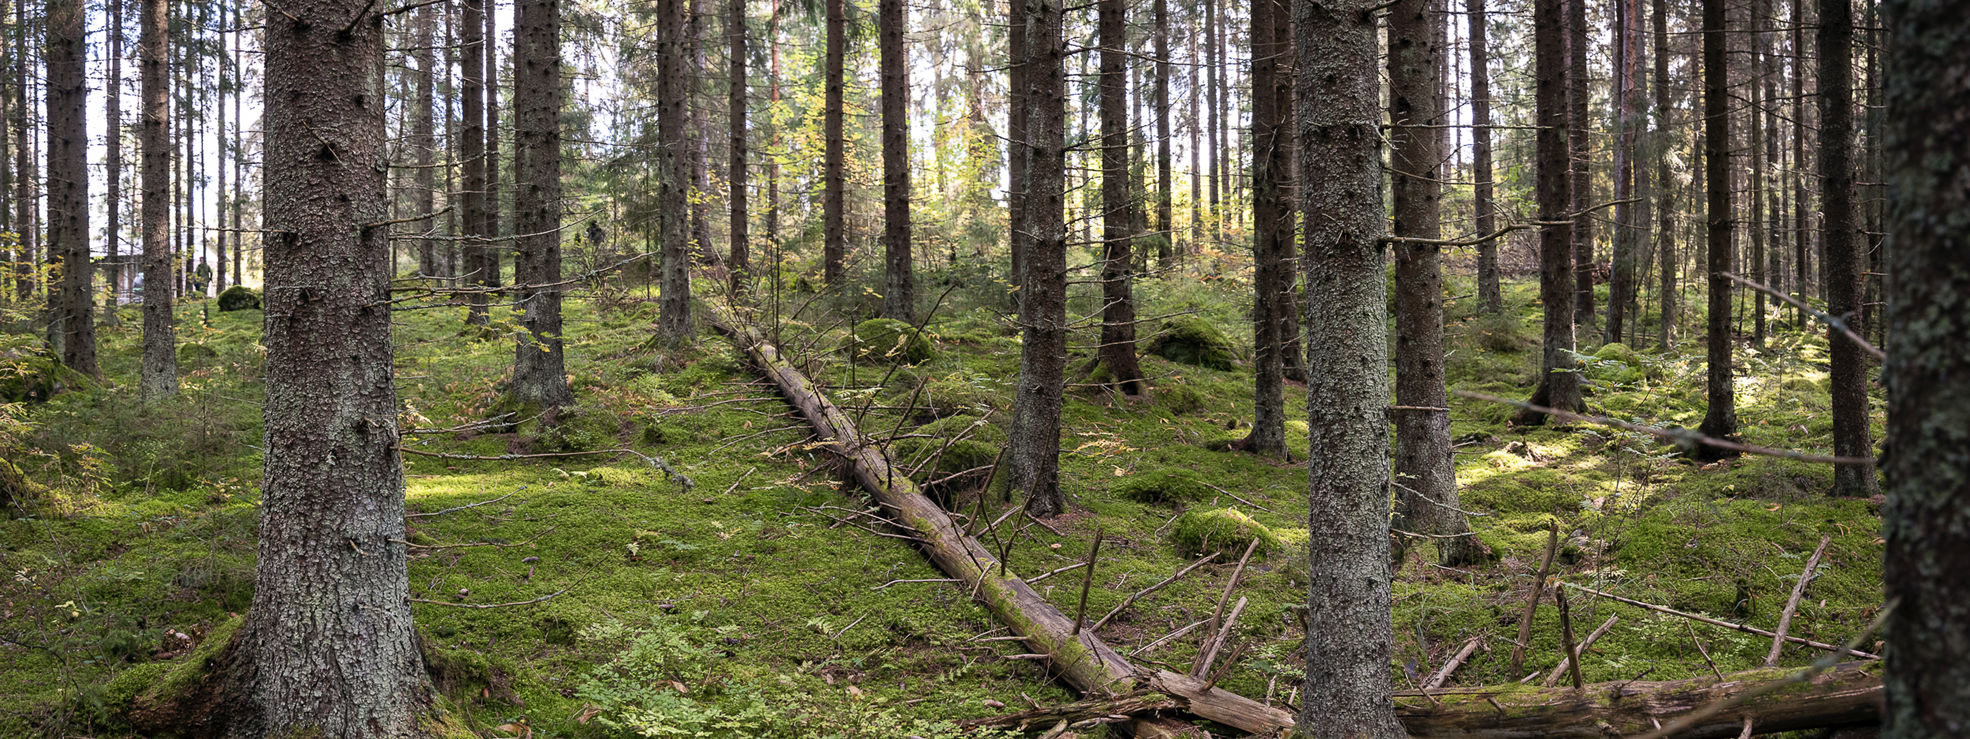 Regenerative forestry aims to strengthen the state of nature